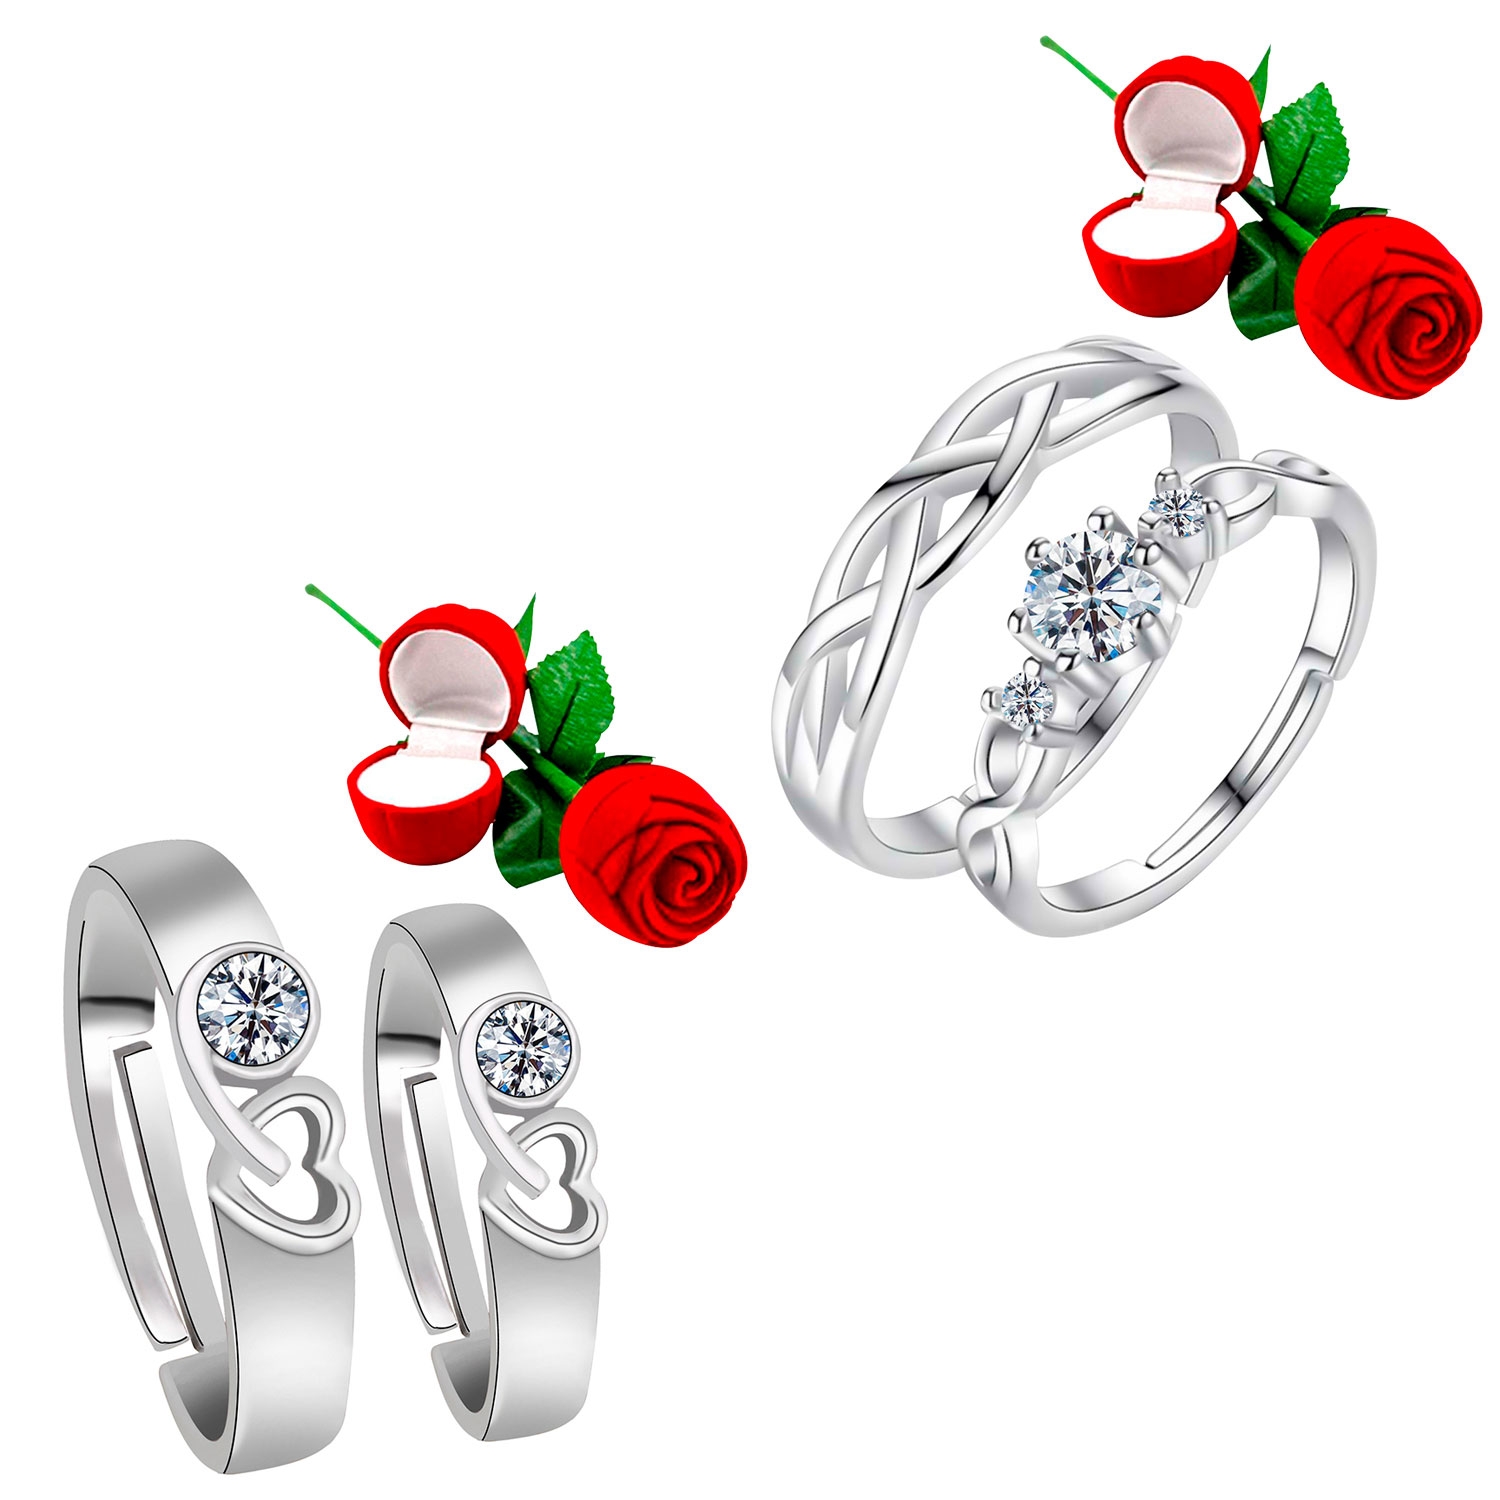 SILVER SHINE |  Adjustable Couple Rings Set for lovers Silver Plated with 2 Piece Red Rose Gift Box Party Wear Ring for Men and Women 